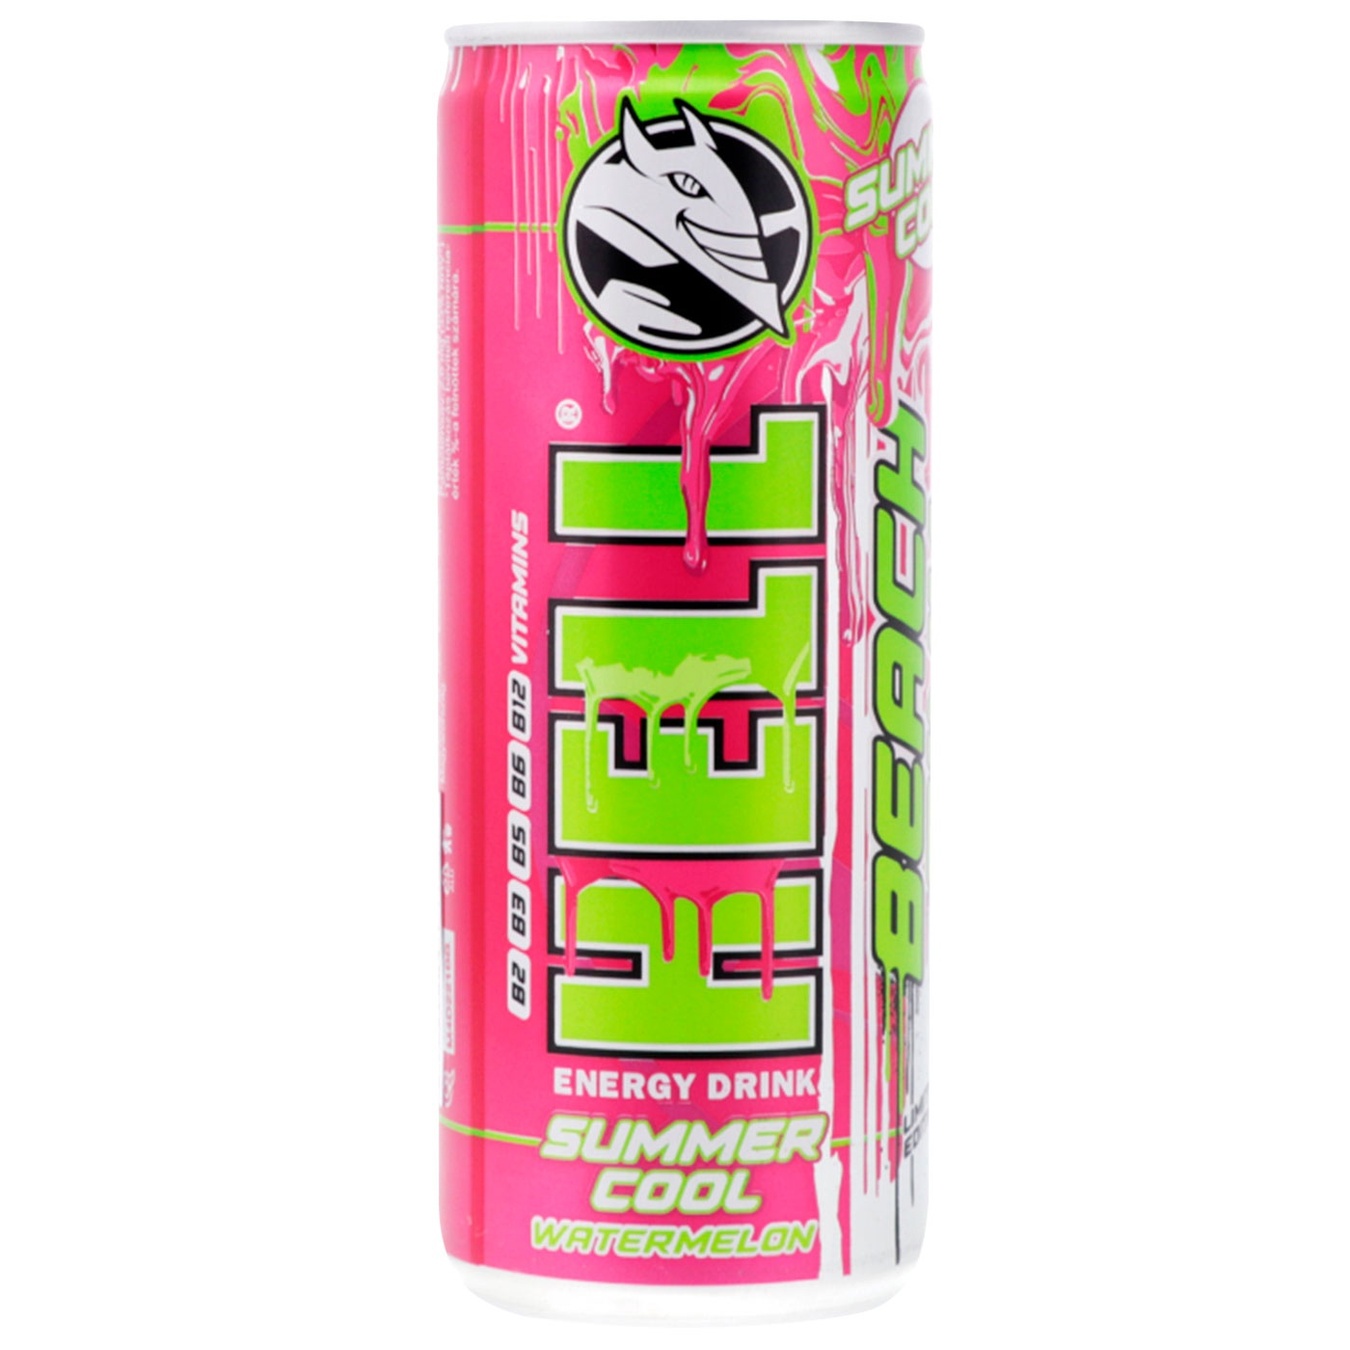 Hell Summer Cool watermelon energy drink 0.25l